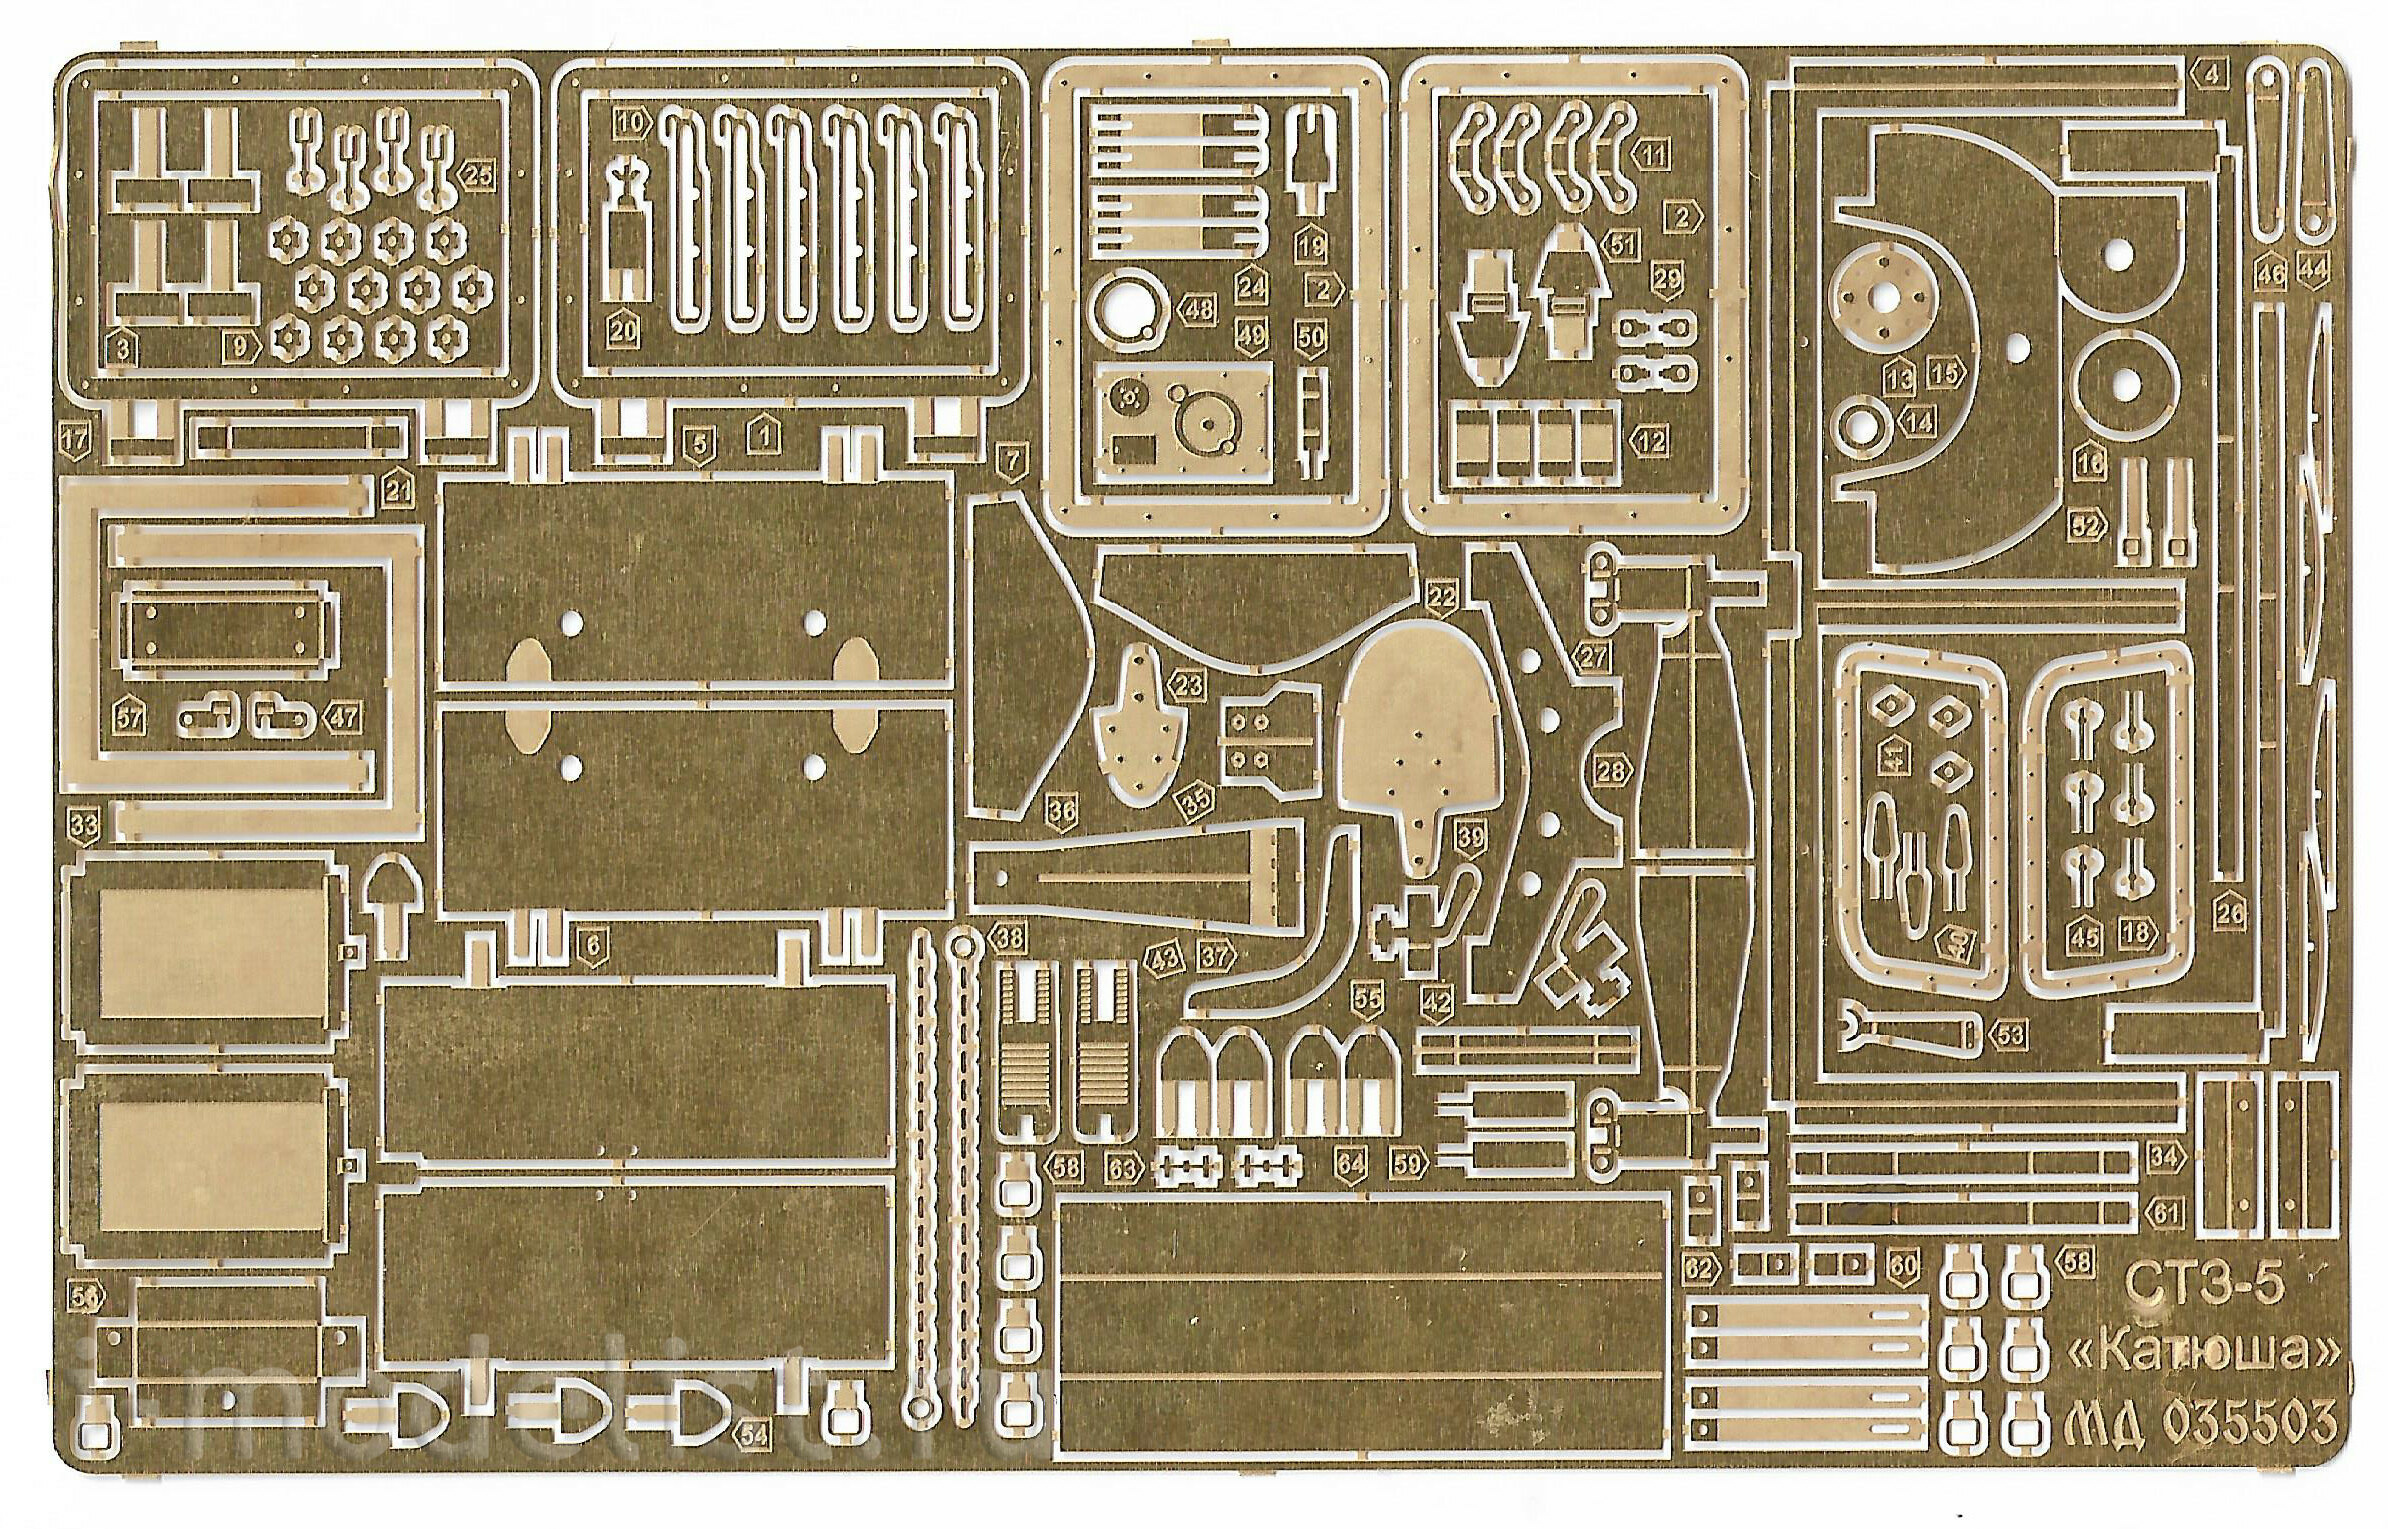 035503 Microdesign 1/35 Photo etching kit on STZ-5 with BM-13 